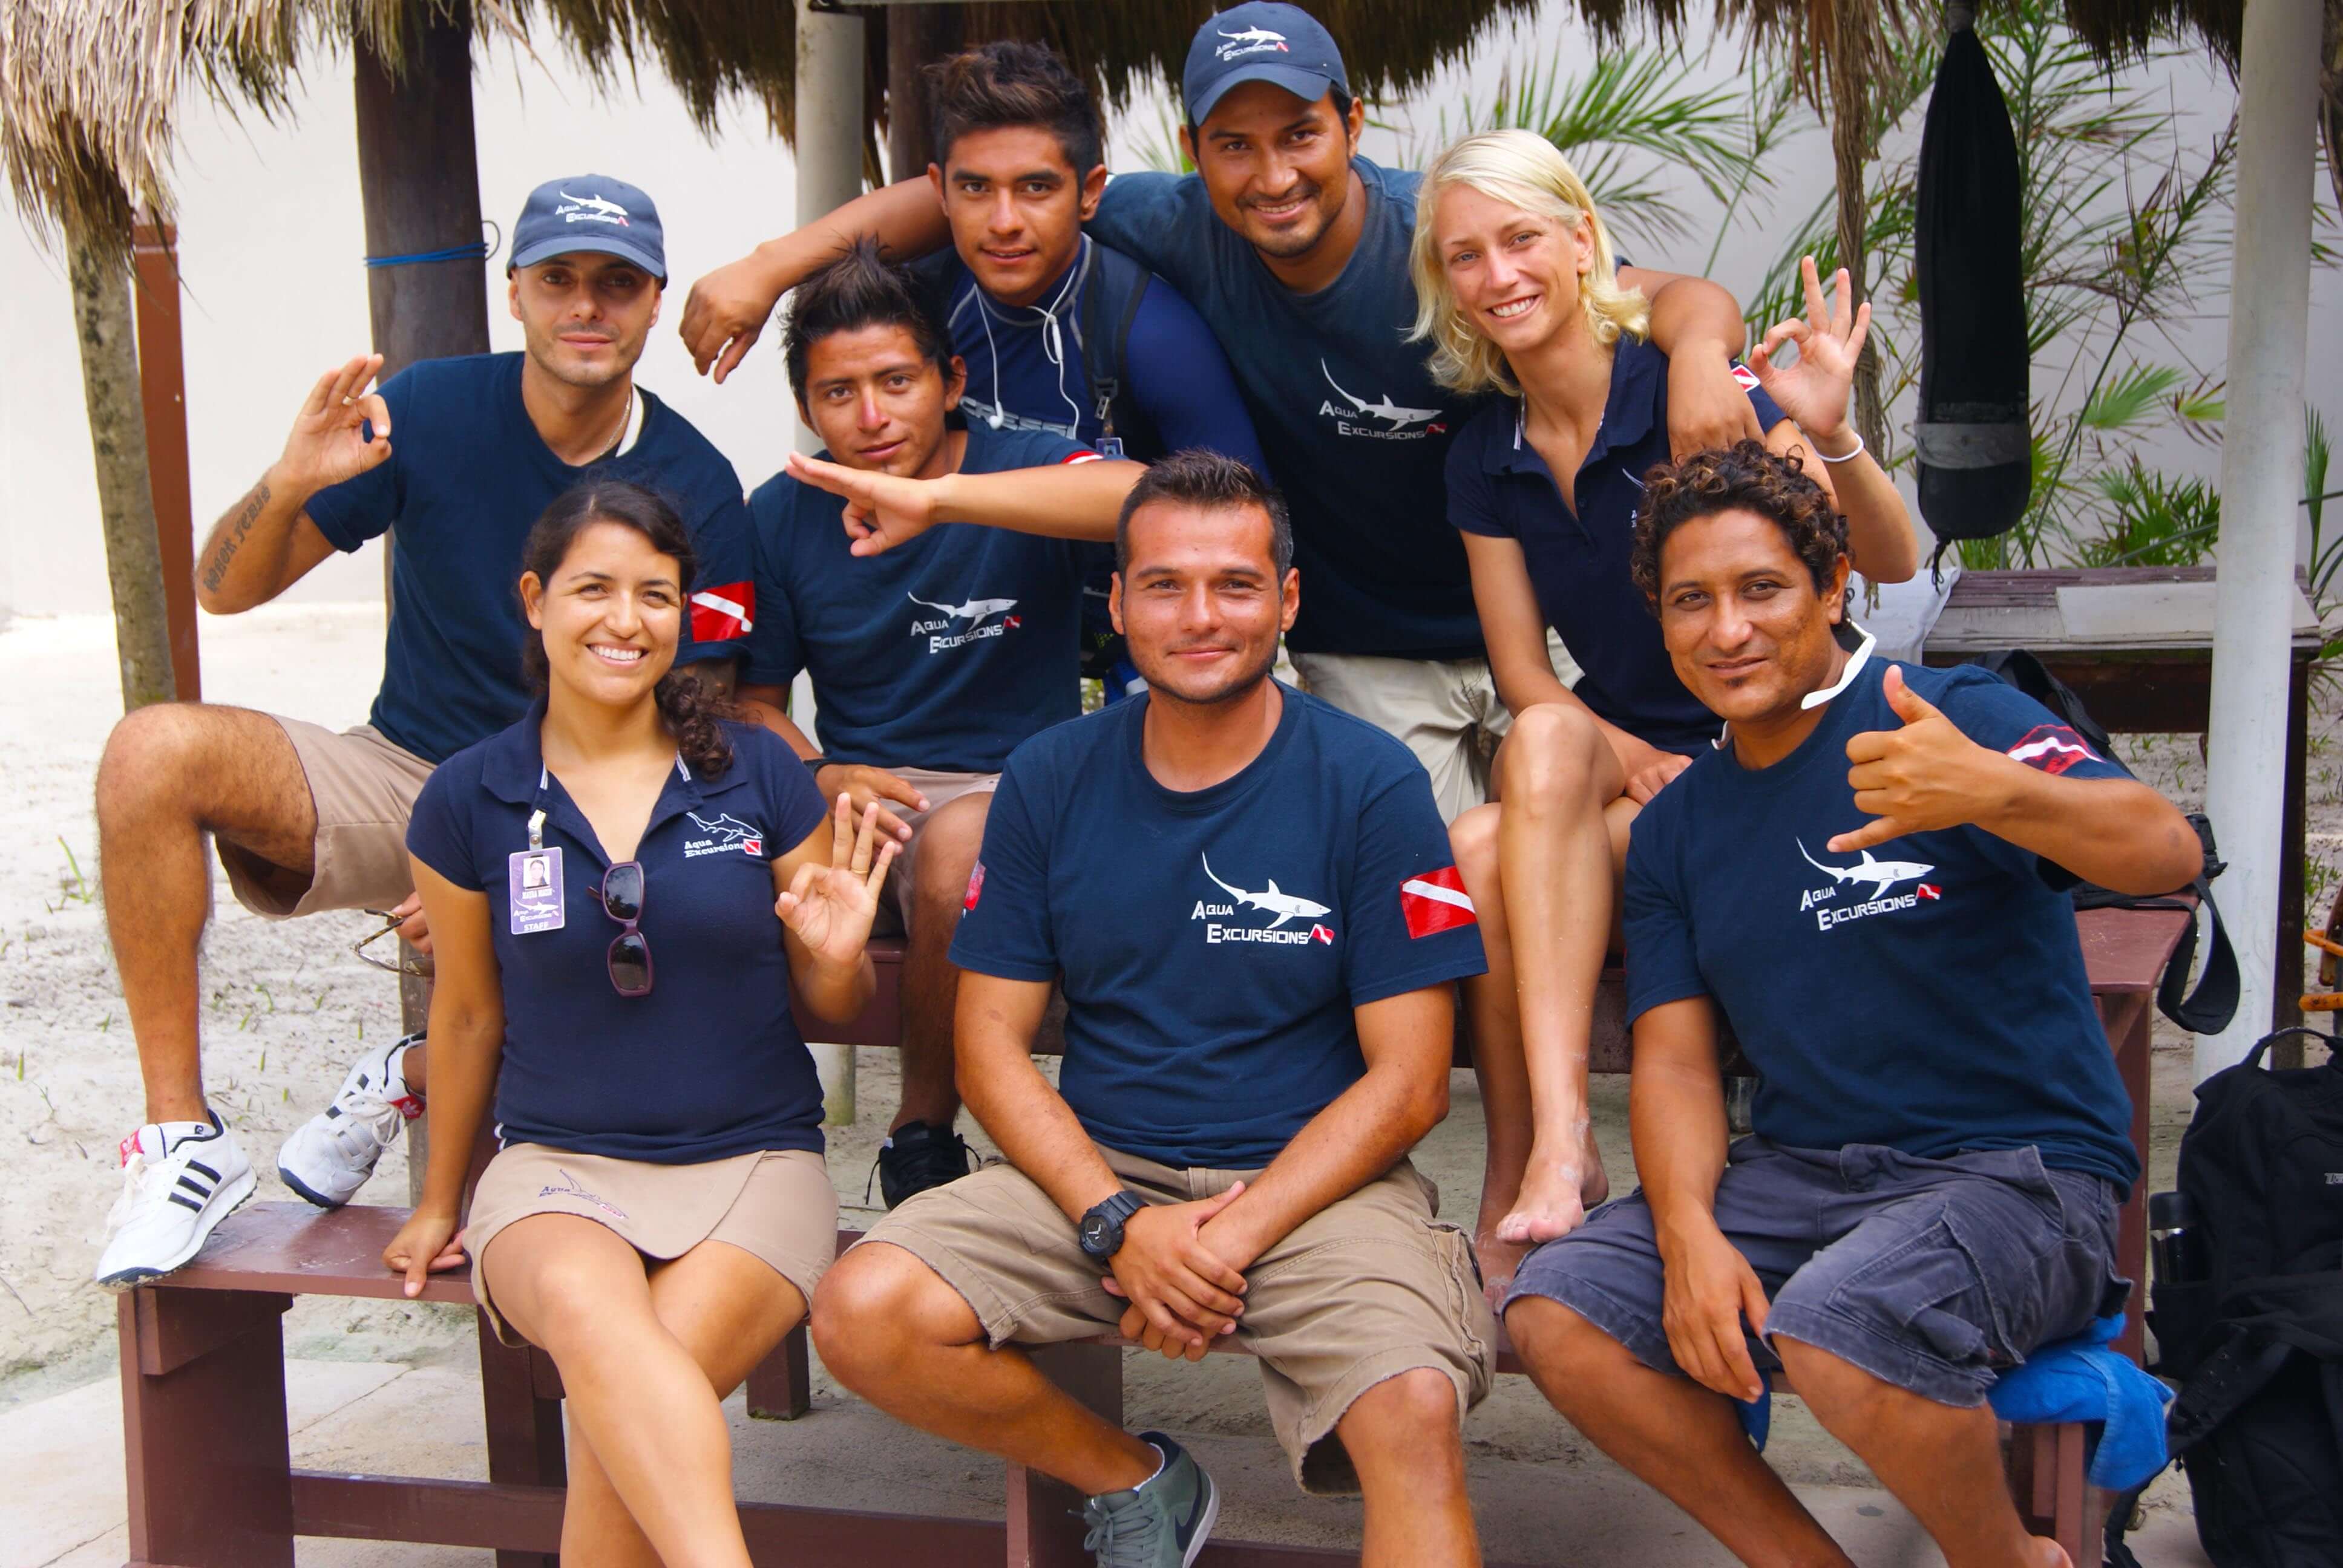 Our base leader, captains, crew members, divemasters and instructors!